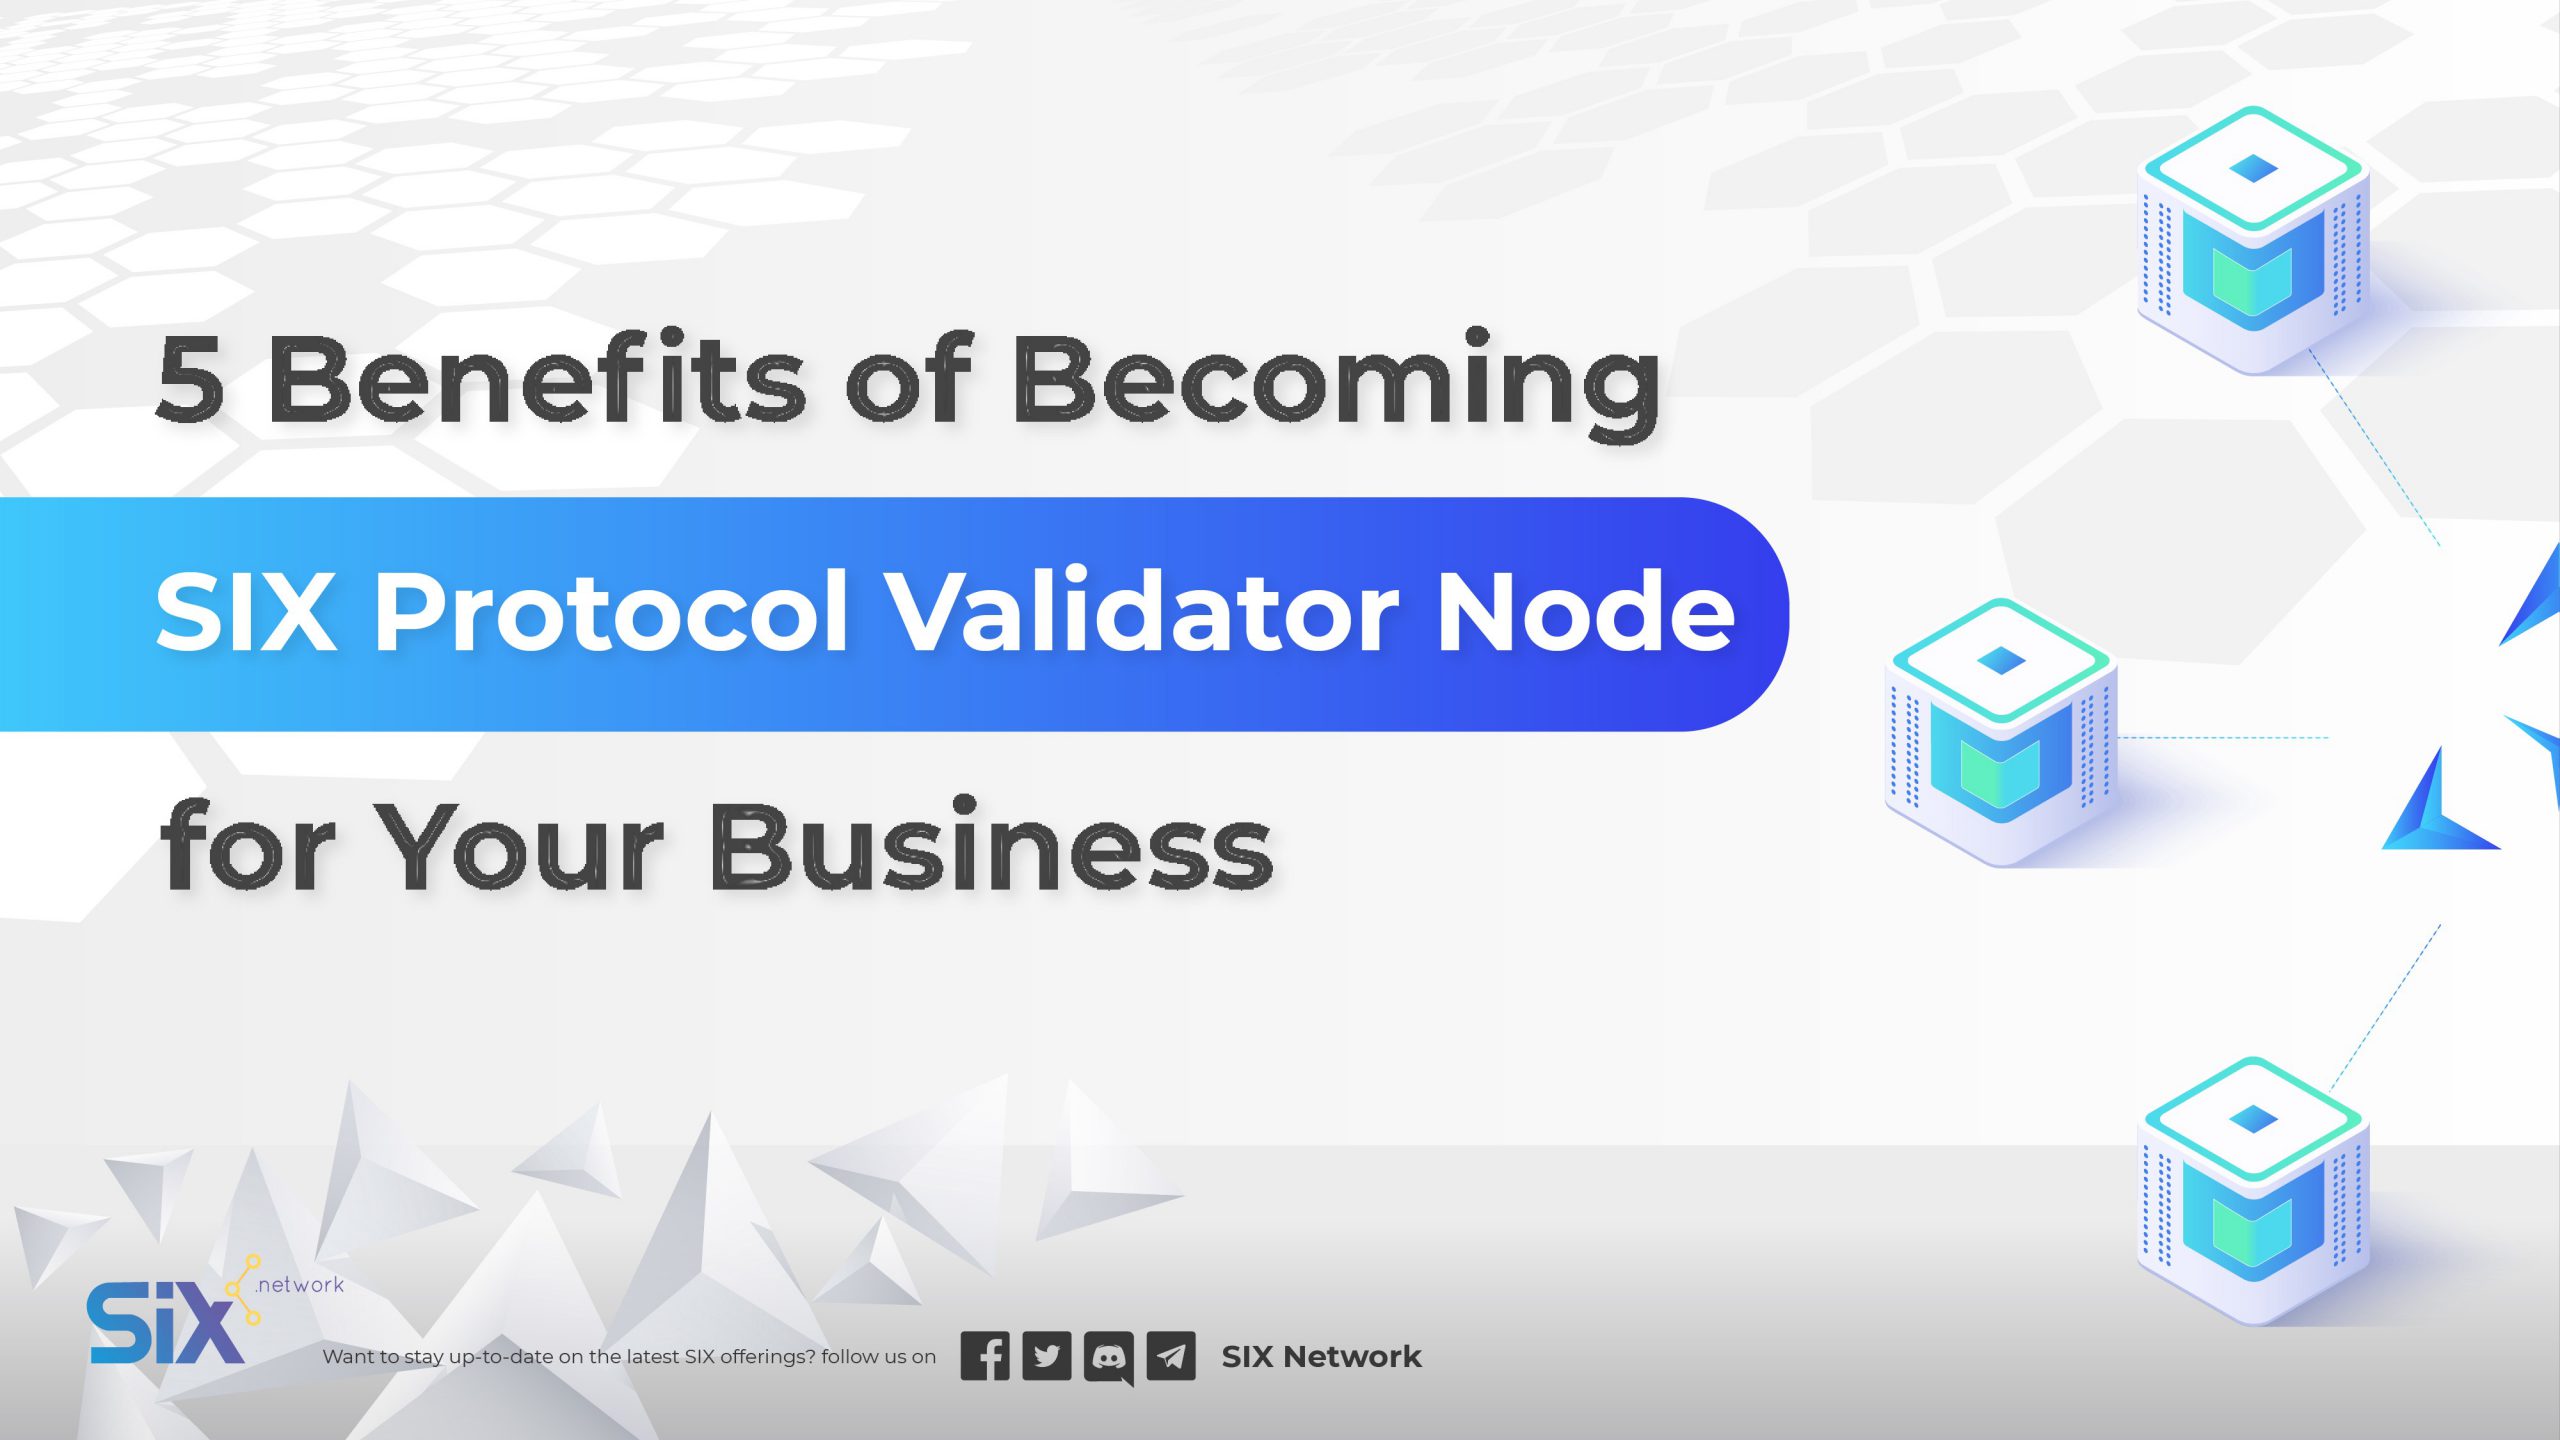 5 Benefits of Becoming SIX Protocol Validator Node for Your Business